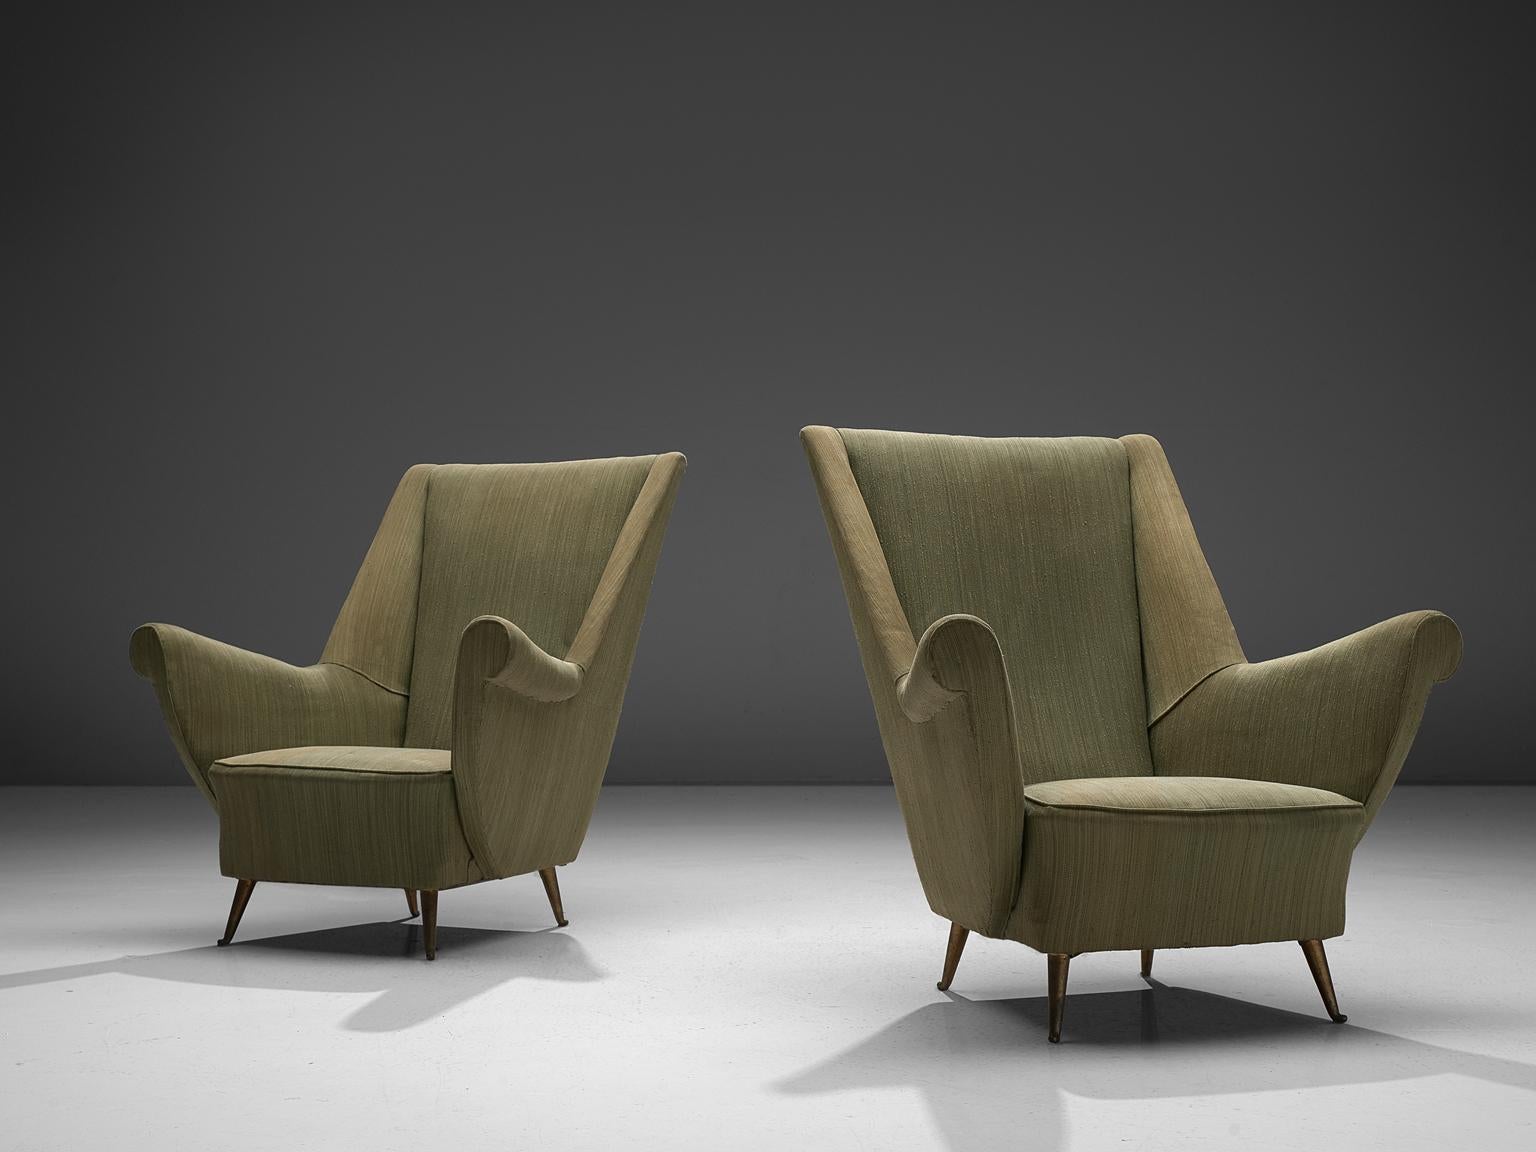 Lounge chairs, green fabric, brassed metal legs, Italy, circa 1950.

This pair lounge chairs is designed in 1950 in Italy. They stand out thanks to their butterfly armrests and high backs. Their size is wonderfully eloquent thanks to the